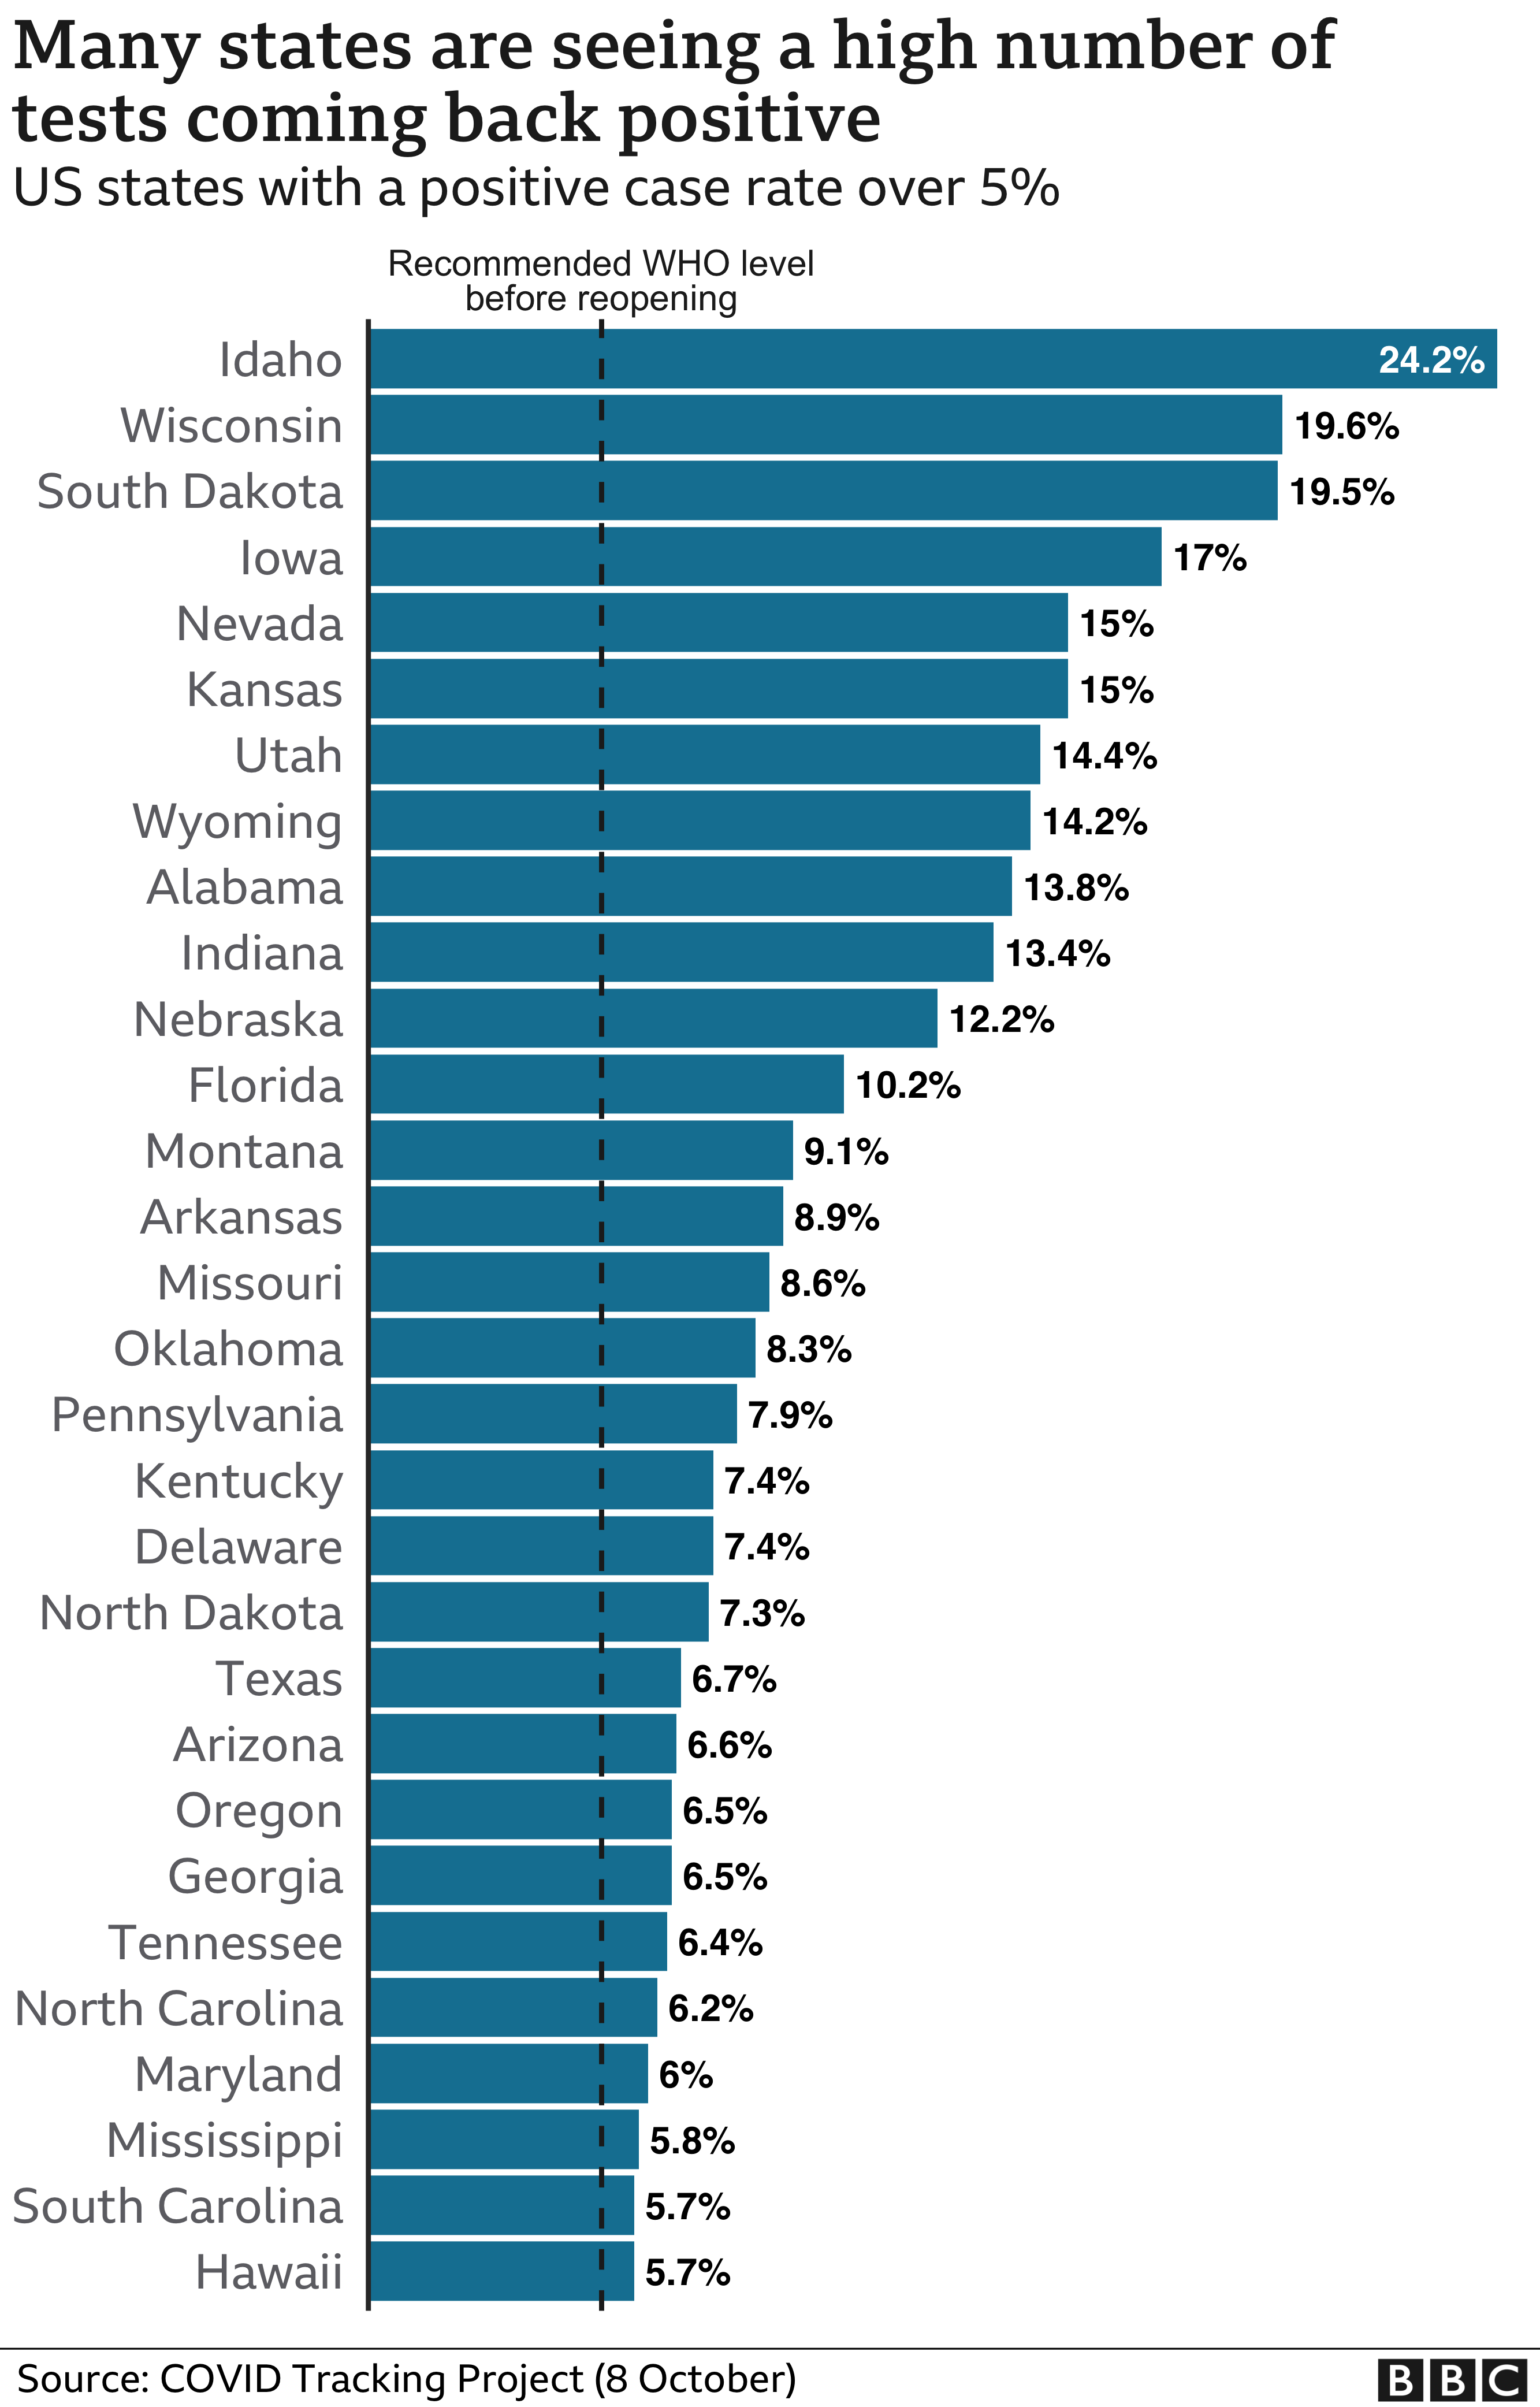 Chart showing the positive case rate for states that are over 5%